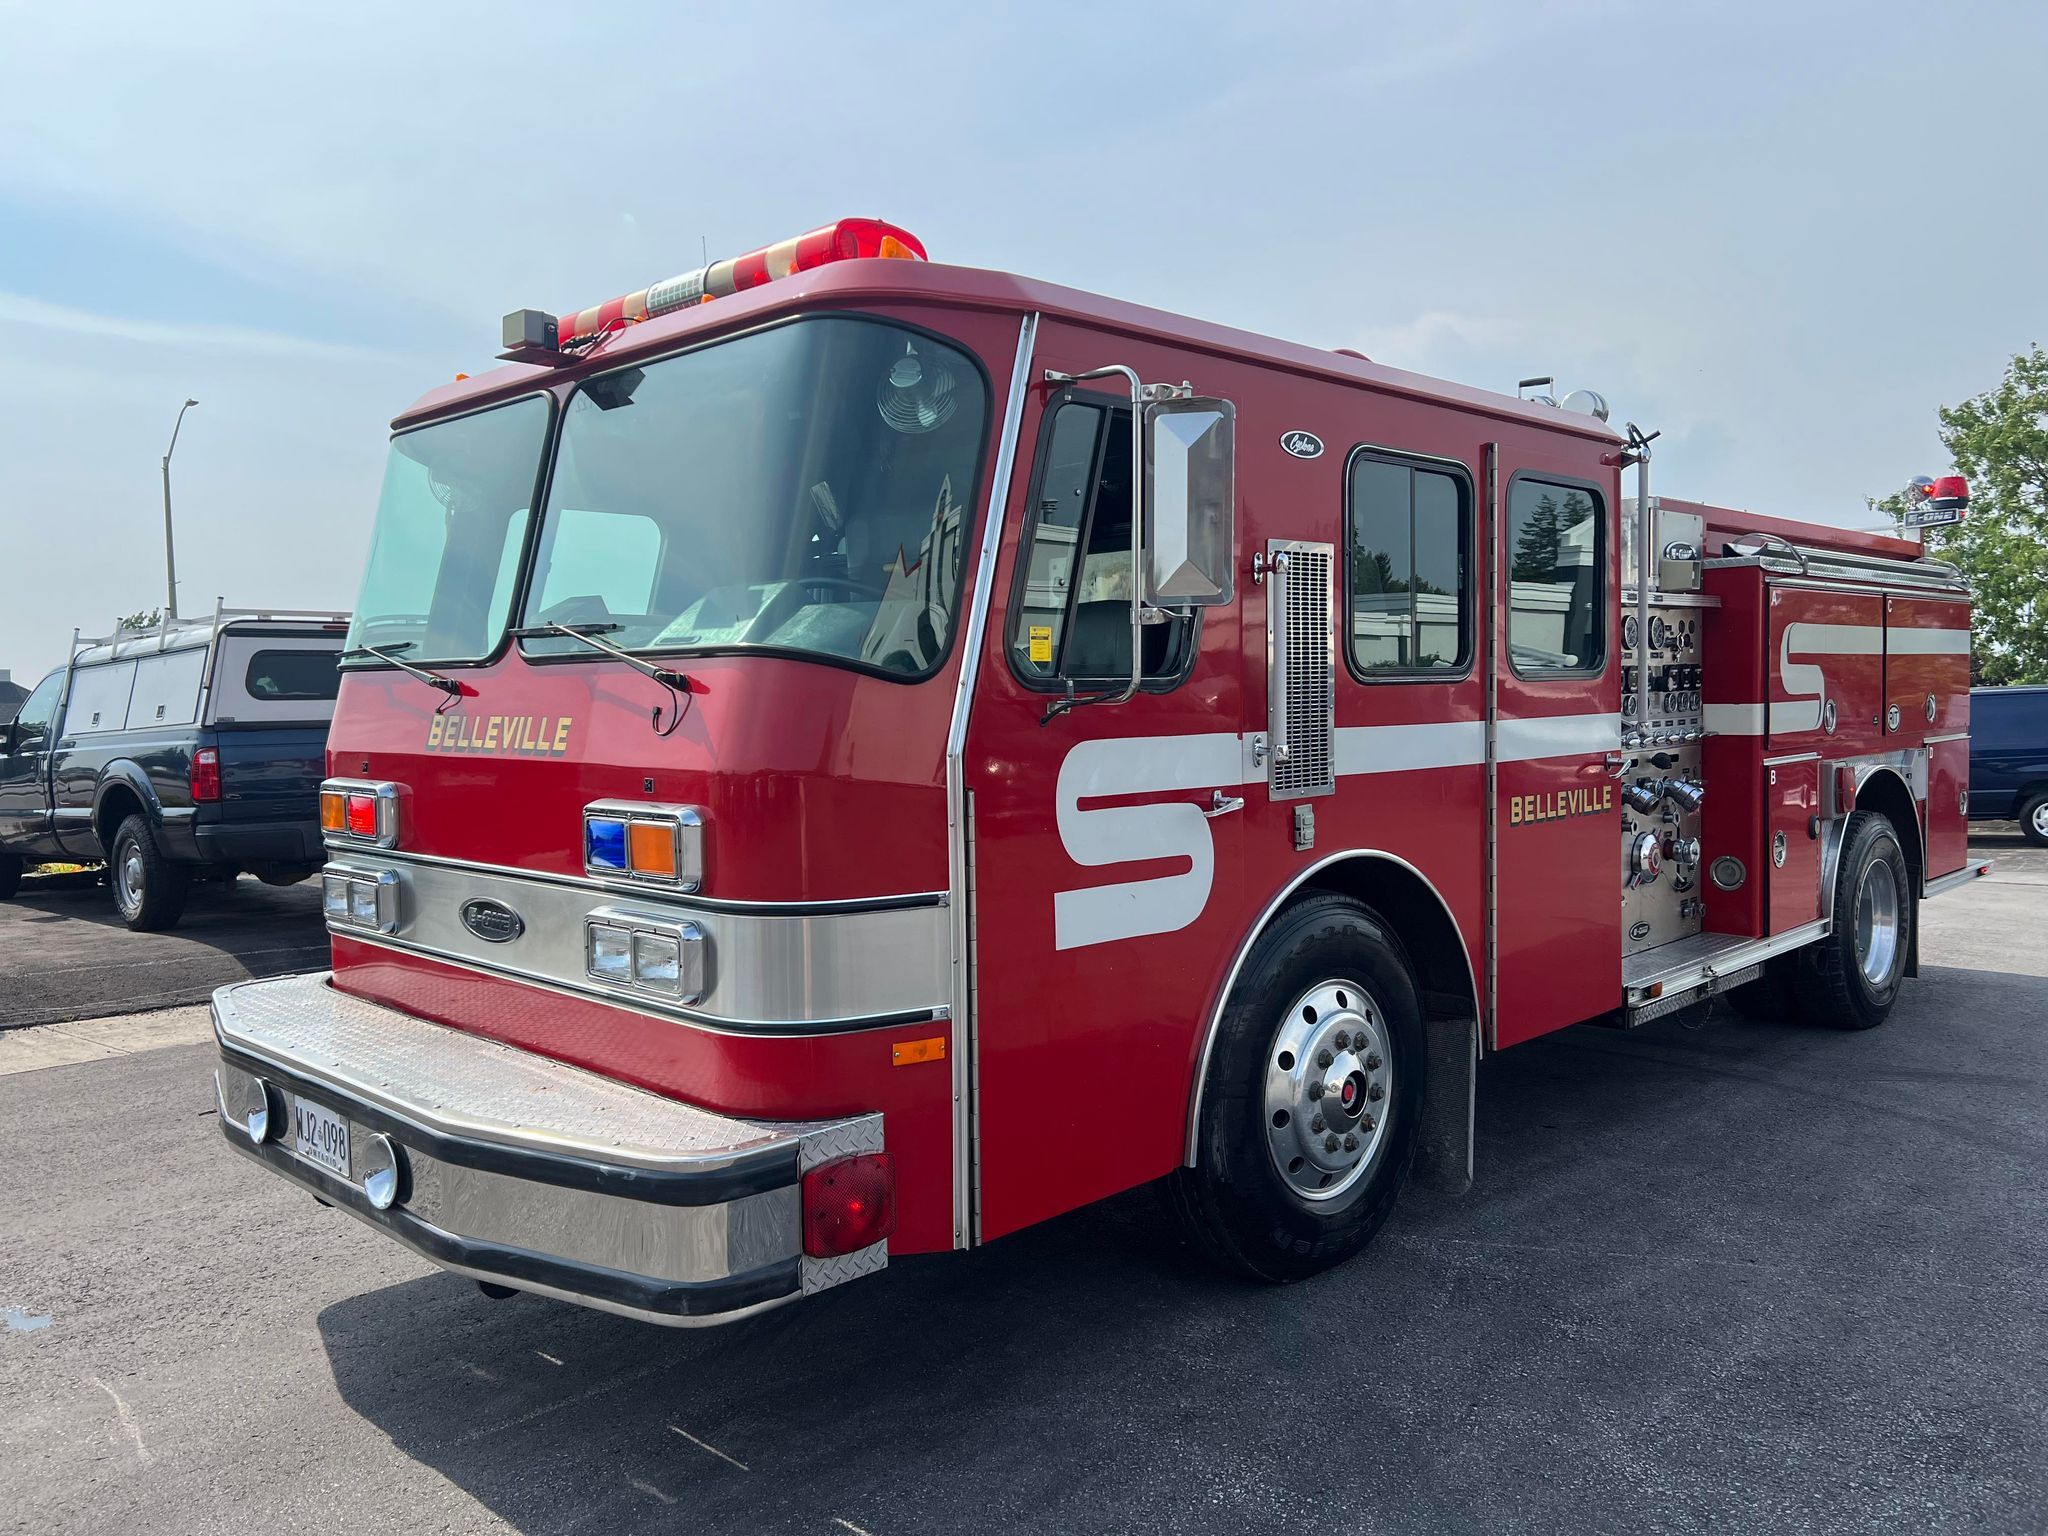 1991 E-One Fire Truck Just Reduced to $14,995.00